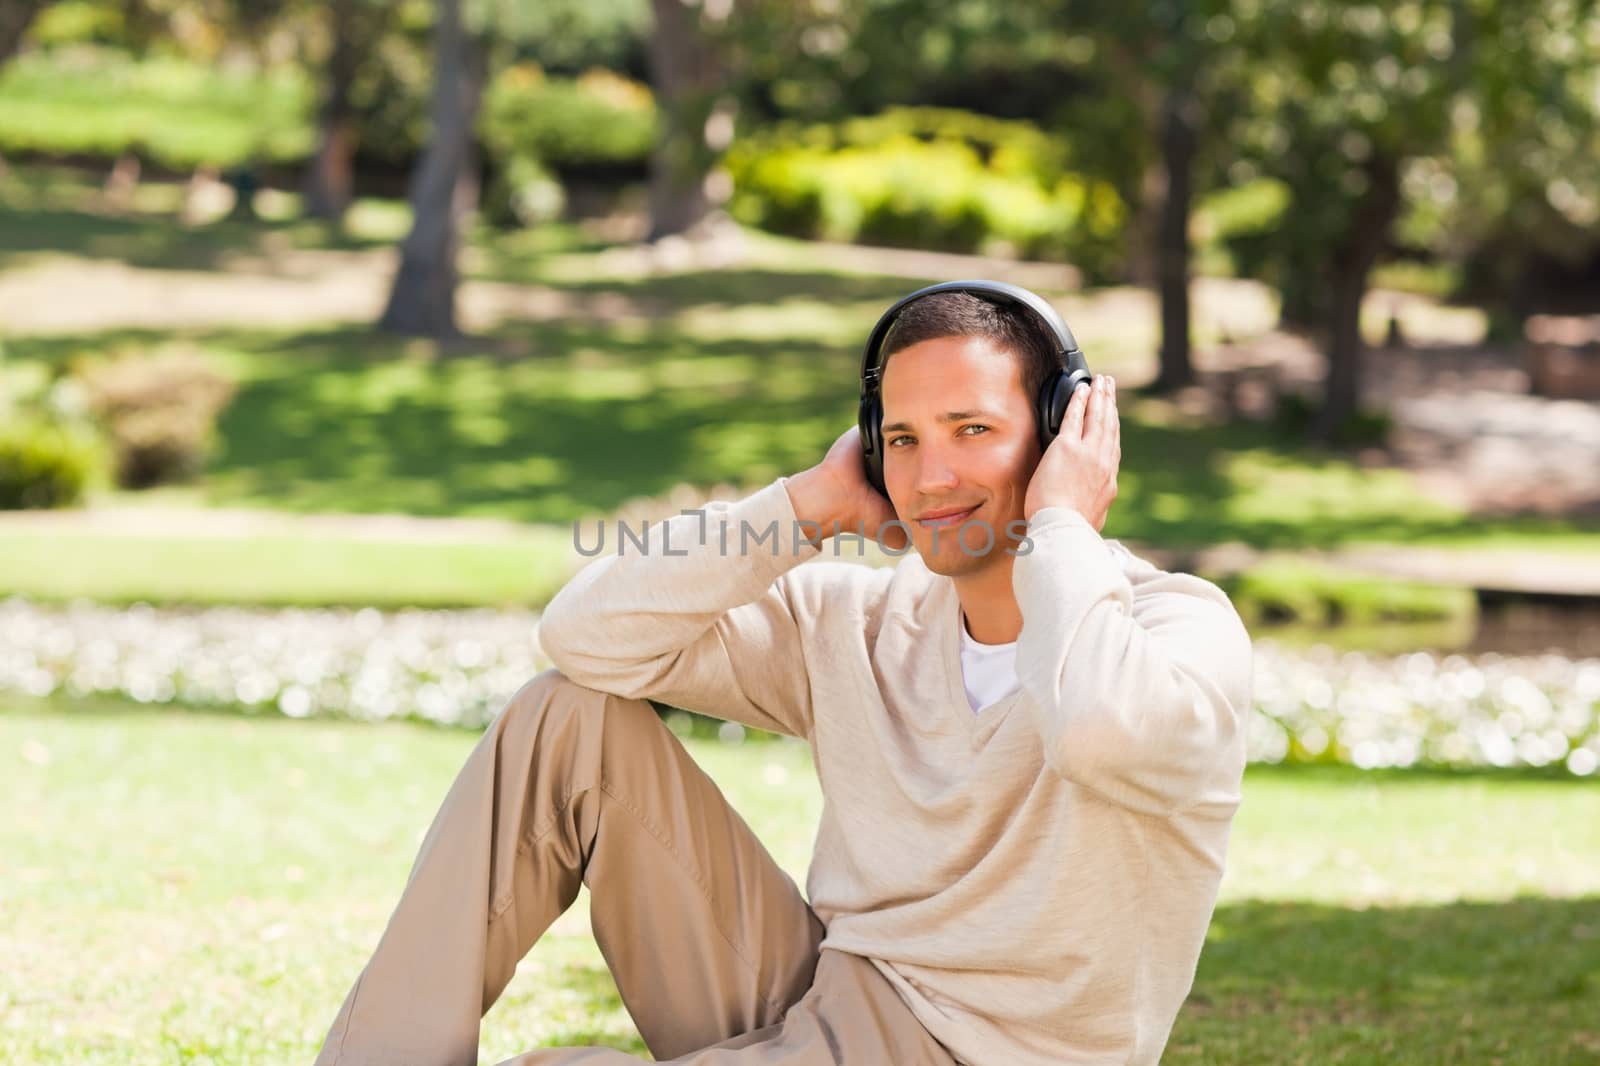 Man listening to music in the park by Wavebreakmedia